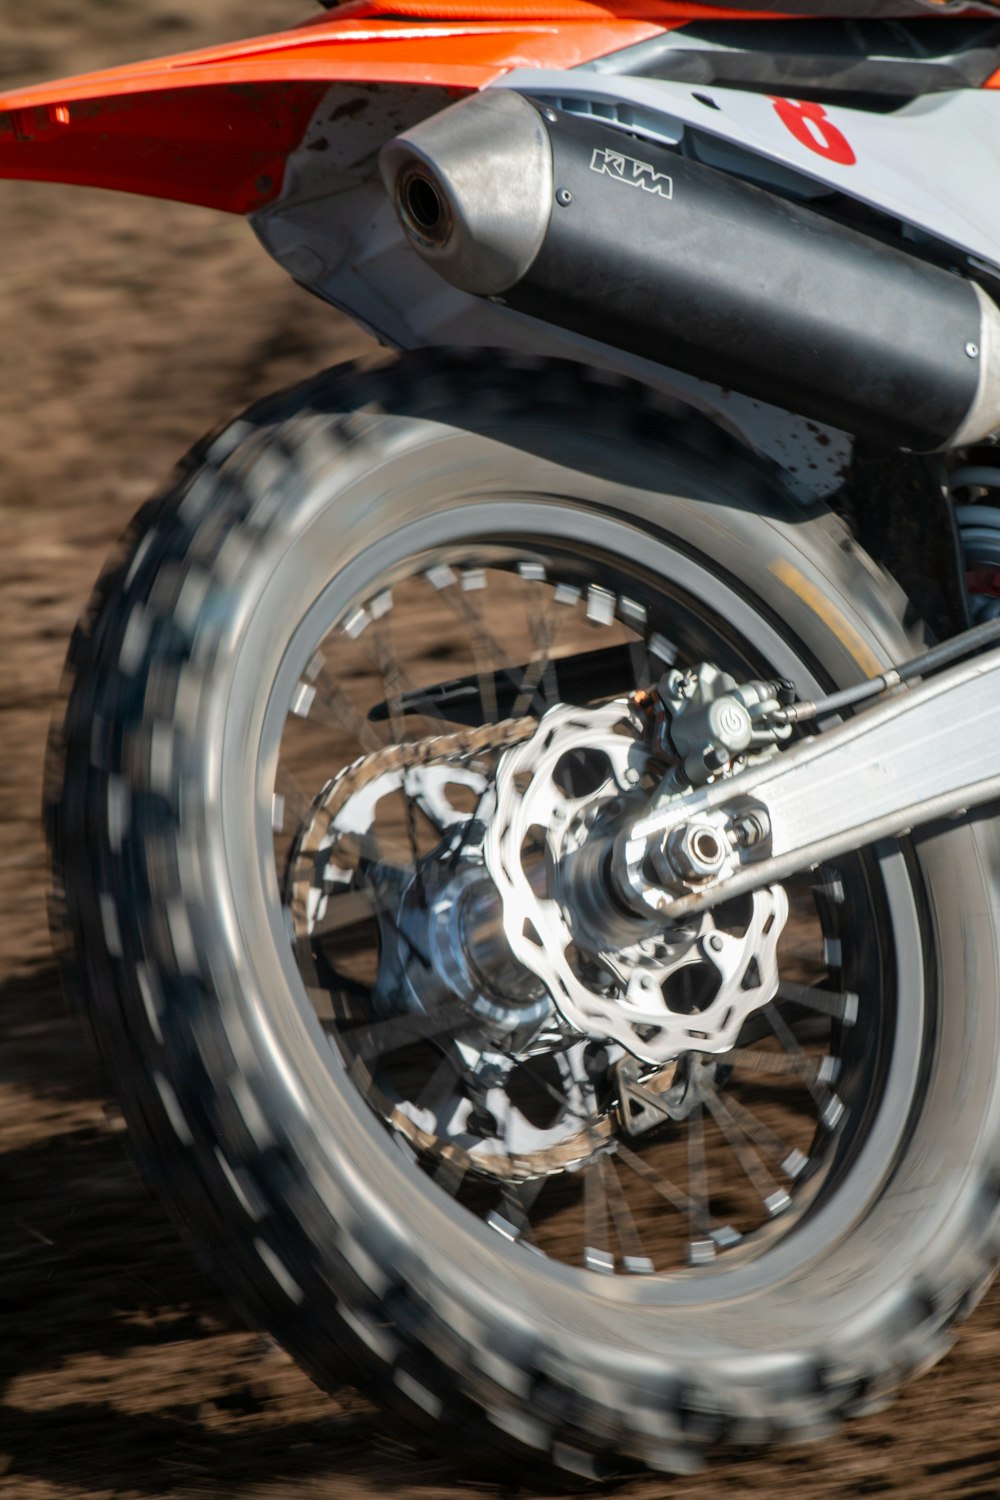 a close up of a motorcycle wheel on a dirt road